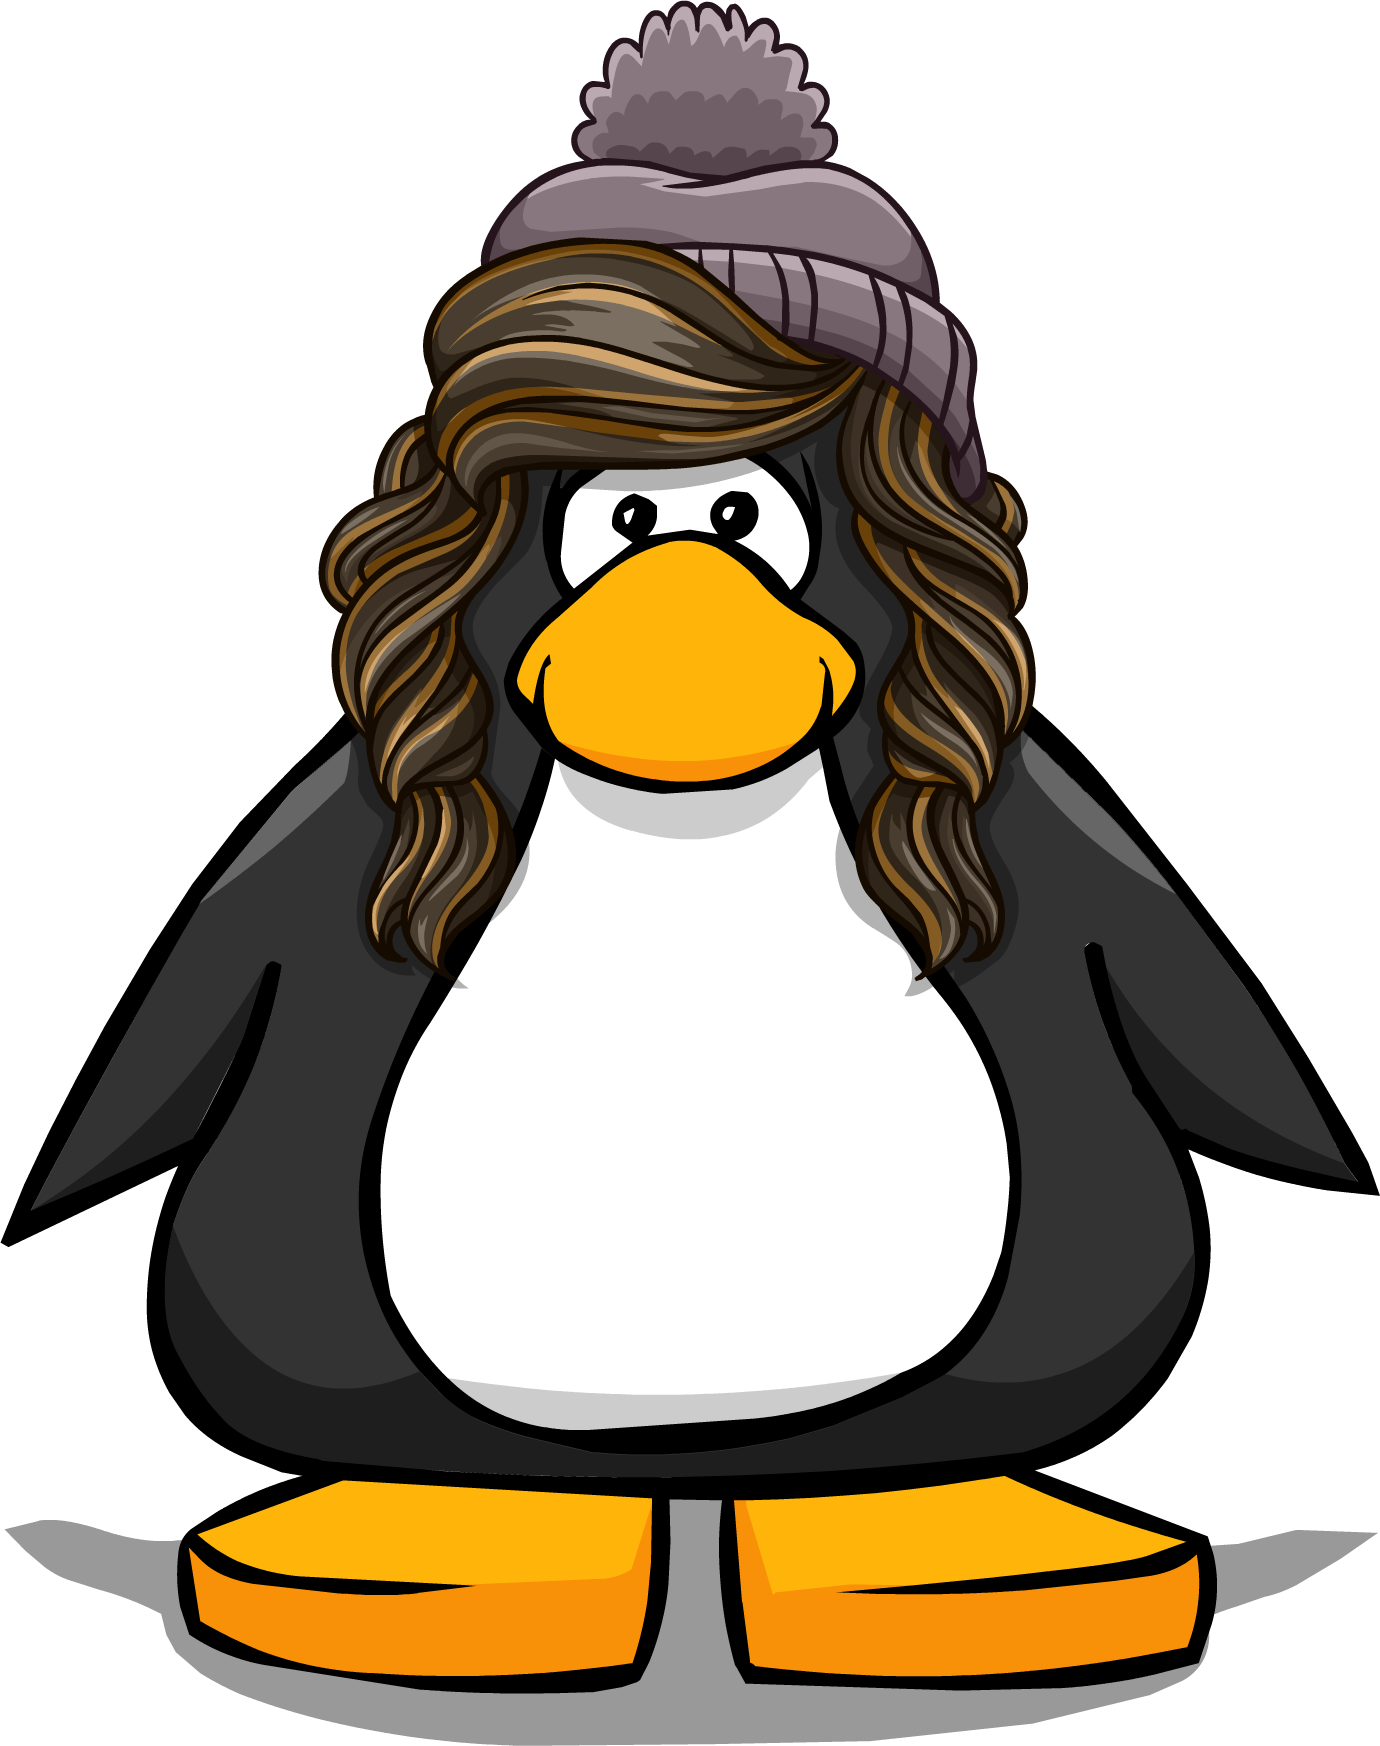 The Snow Day From A Player Card - Club Penguin Bling Bling Necklace (1380x1746)